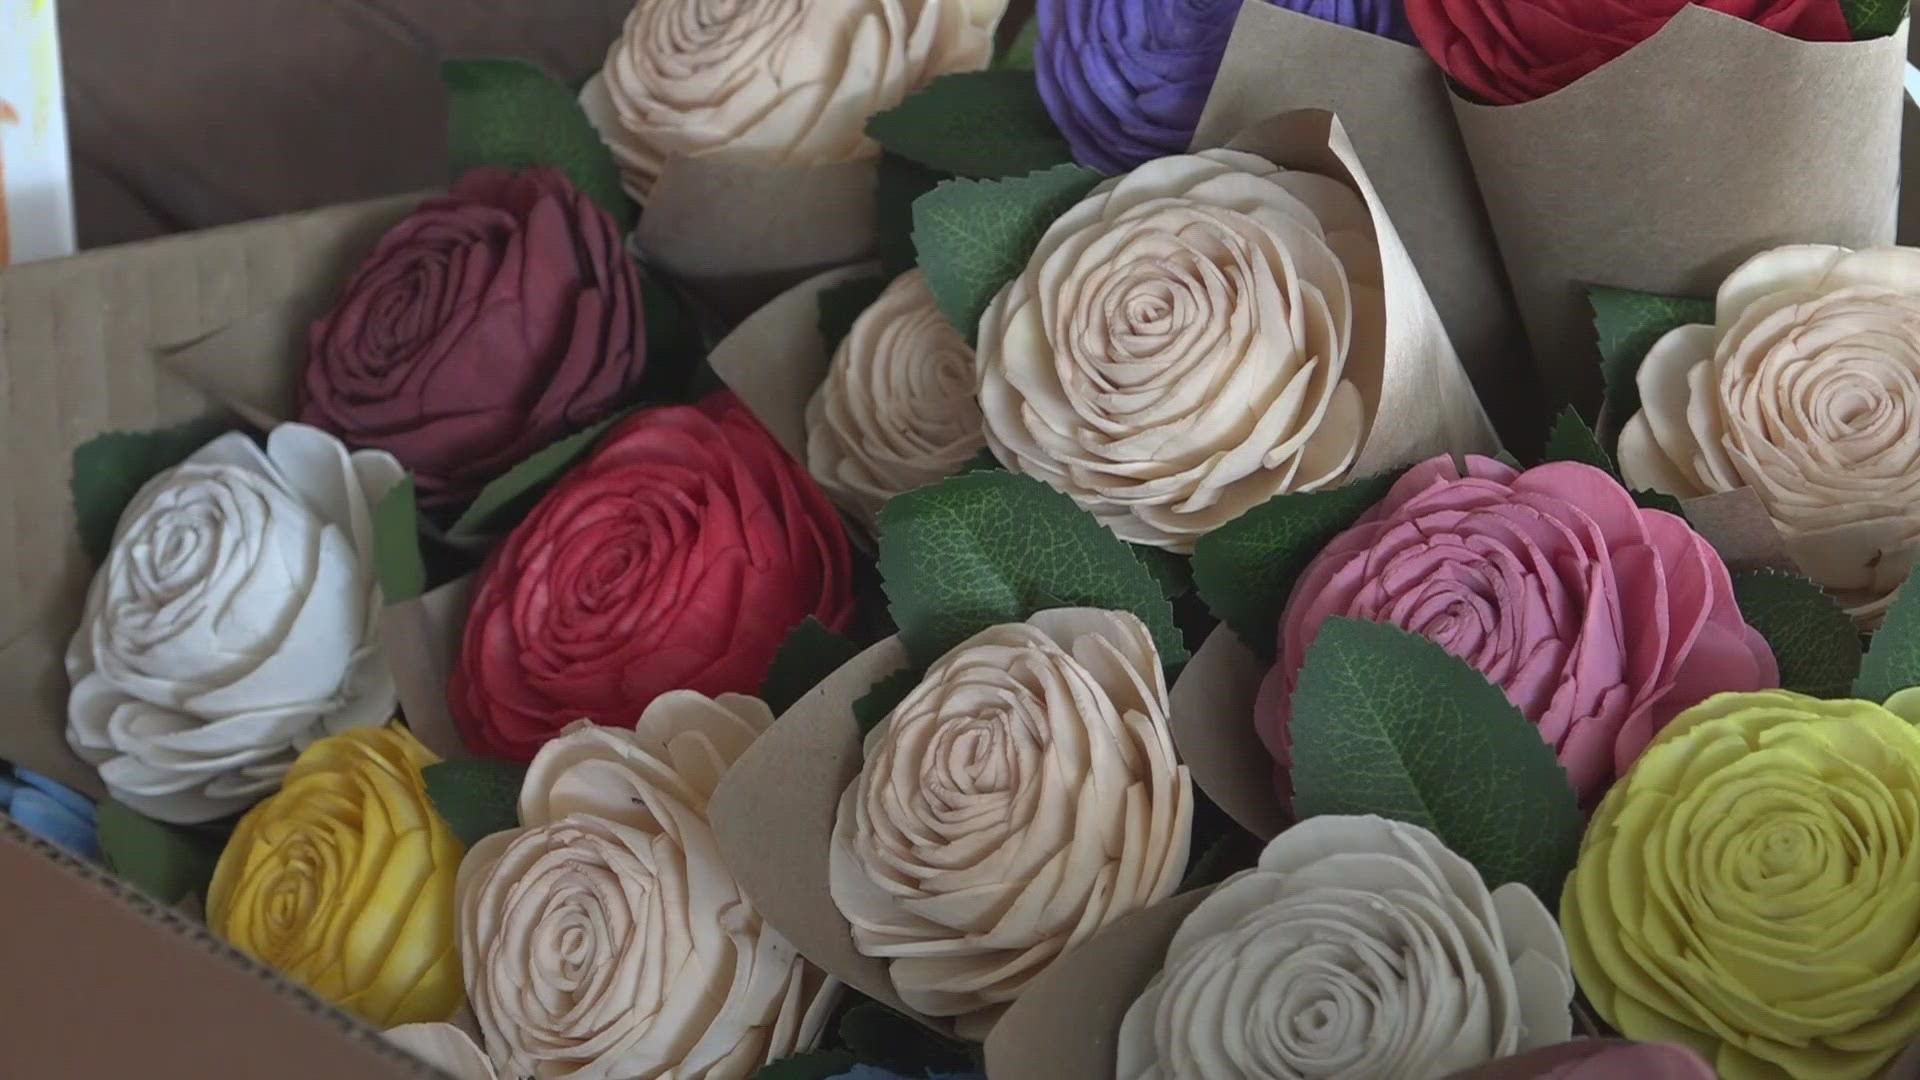 Kathleen Chenery started crafting during the pandemic and brought 75 nursing home residents wooden flowers for Valentine's Day.